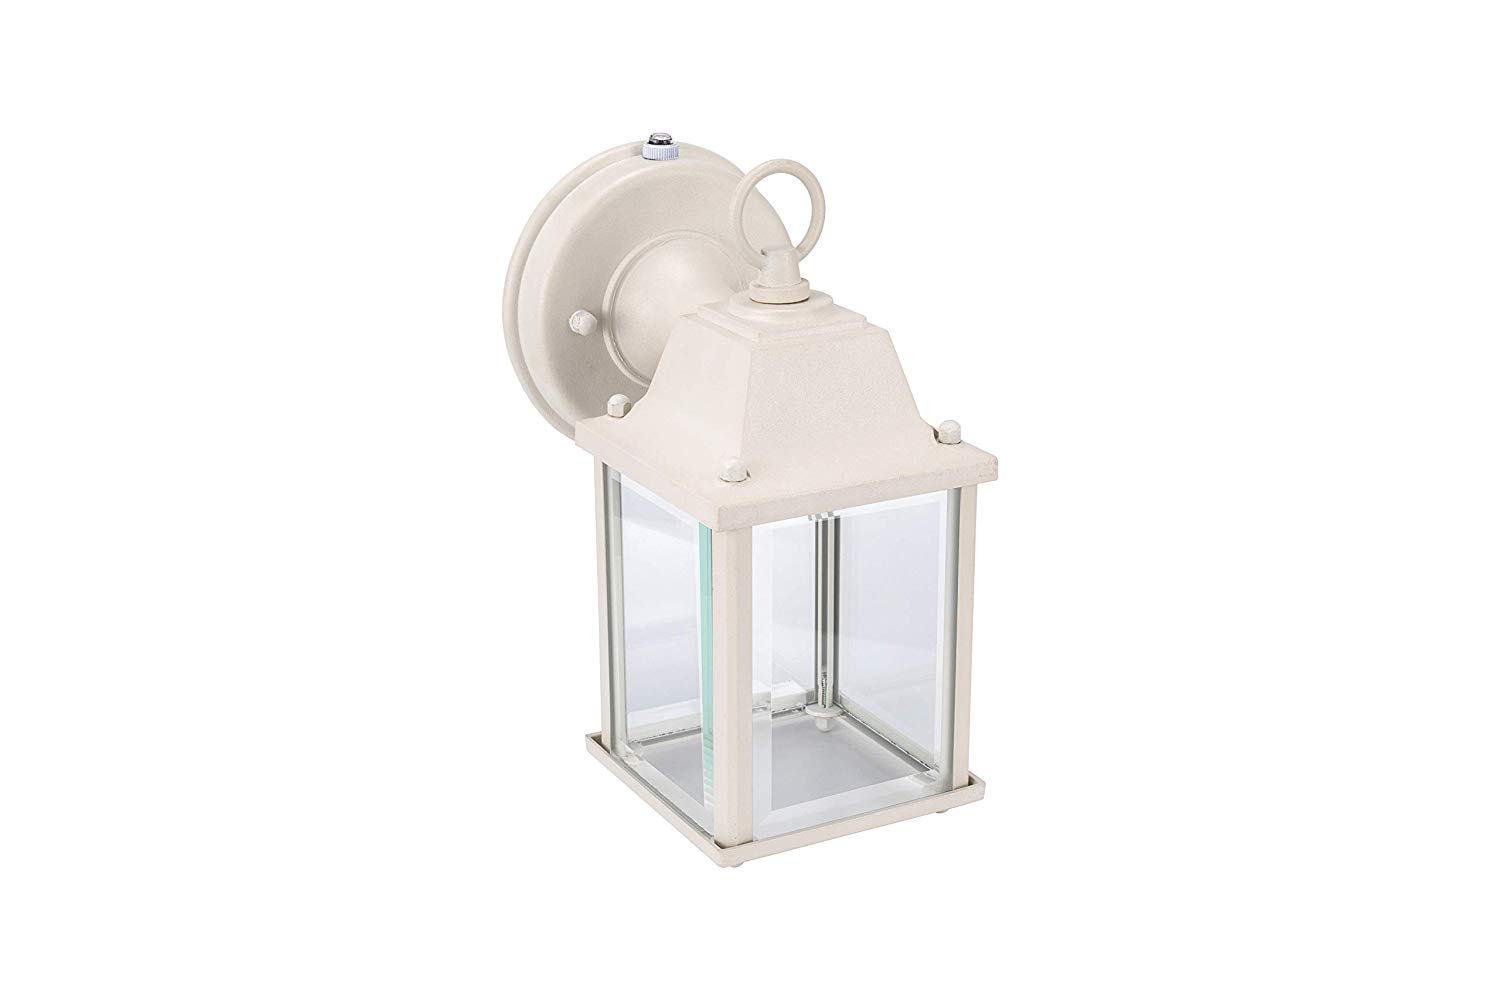 White 800 Lumen LED Wall Sconce Aluminum Housing Plus Glass LIT-PaTH Dusk to Dawn Outdoor Wall Lantern 2-Pack 9.5W 5000K Daylight White Outdoor Rated 75W Equivalent